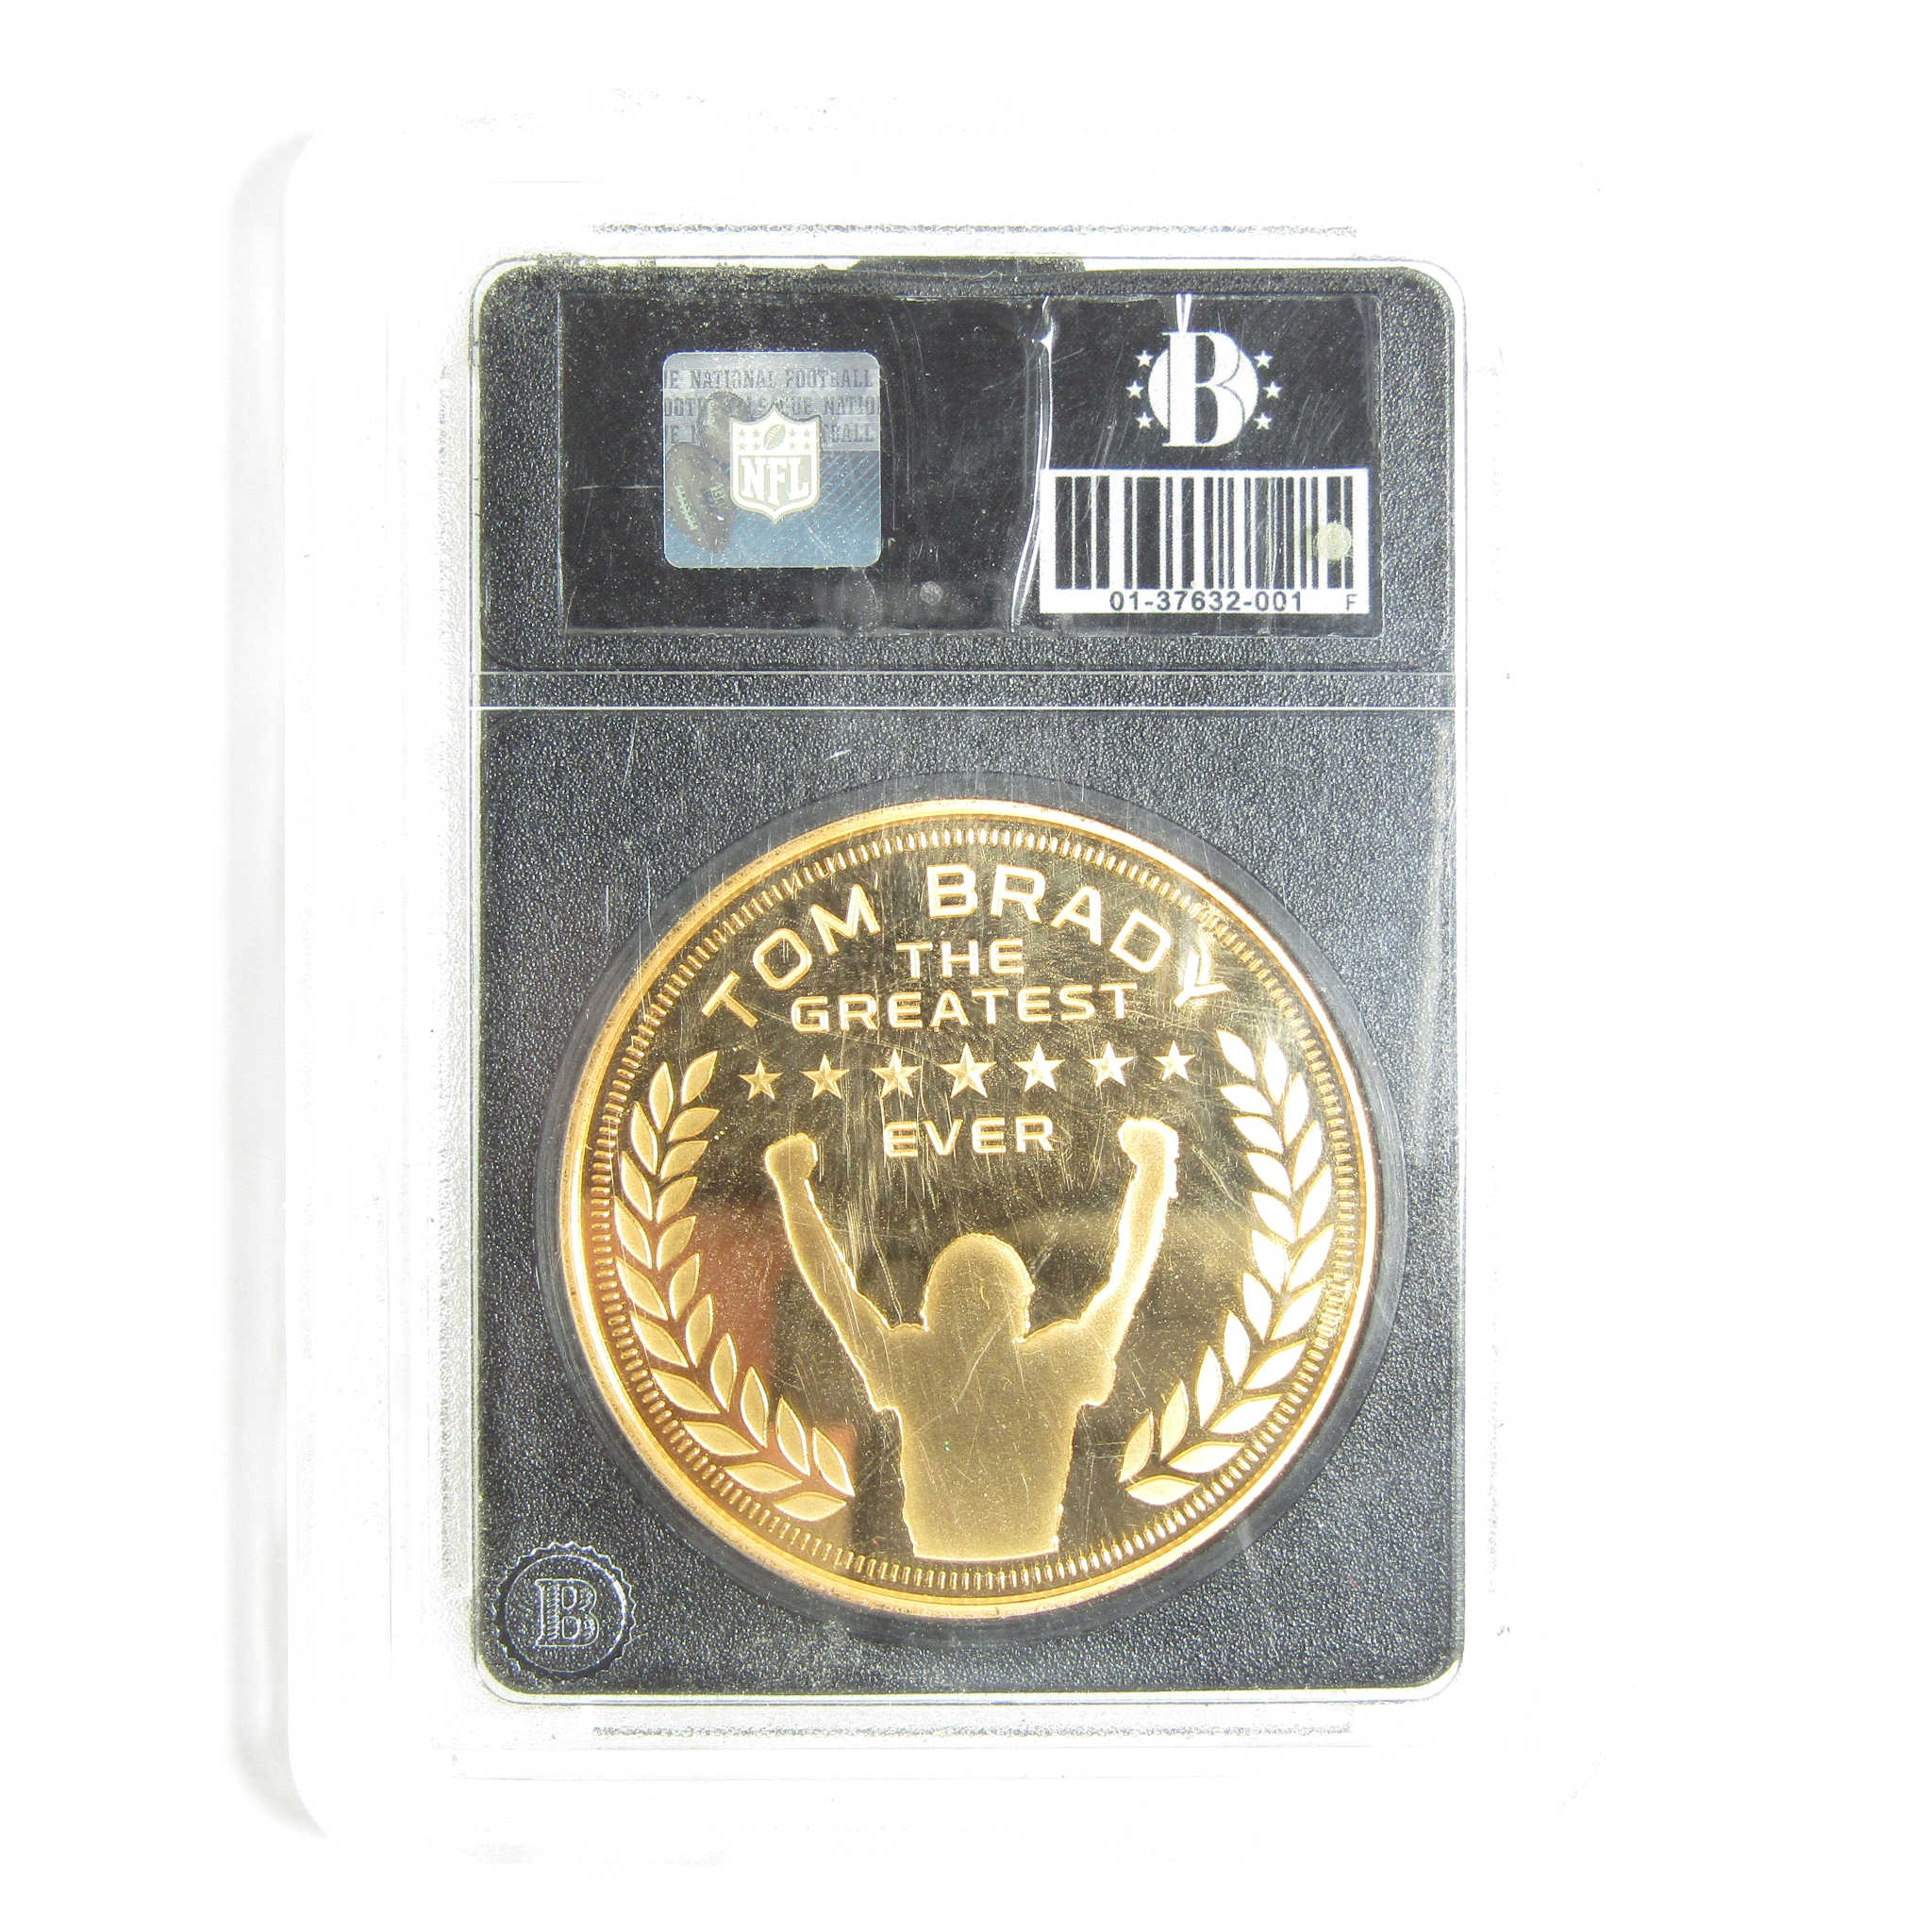 Tom Brady The Greatest Ever 24K Gold-Plated Proof Coin SKU:CPC6762